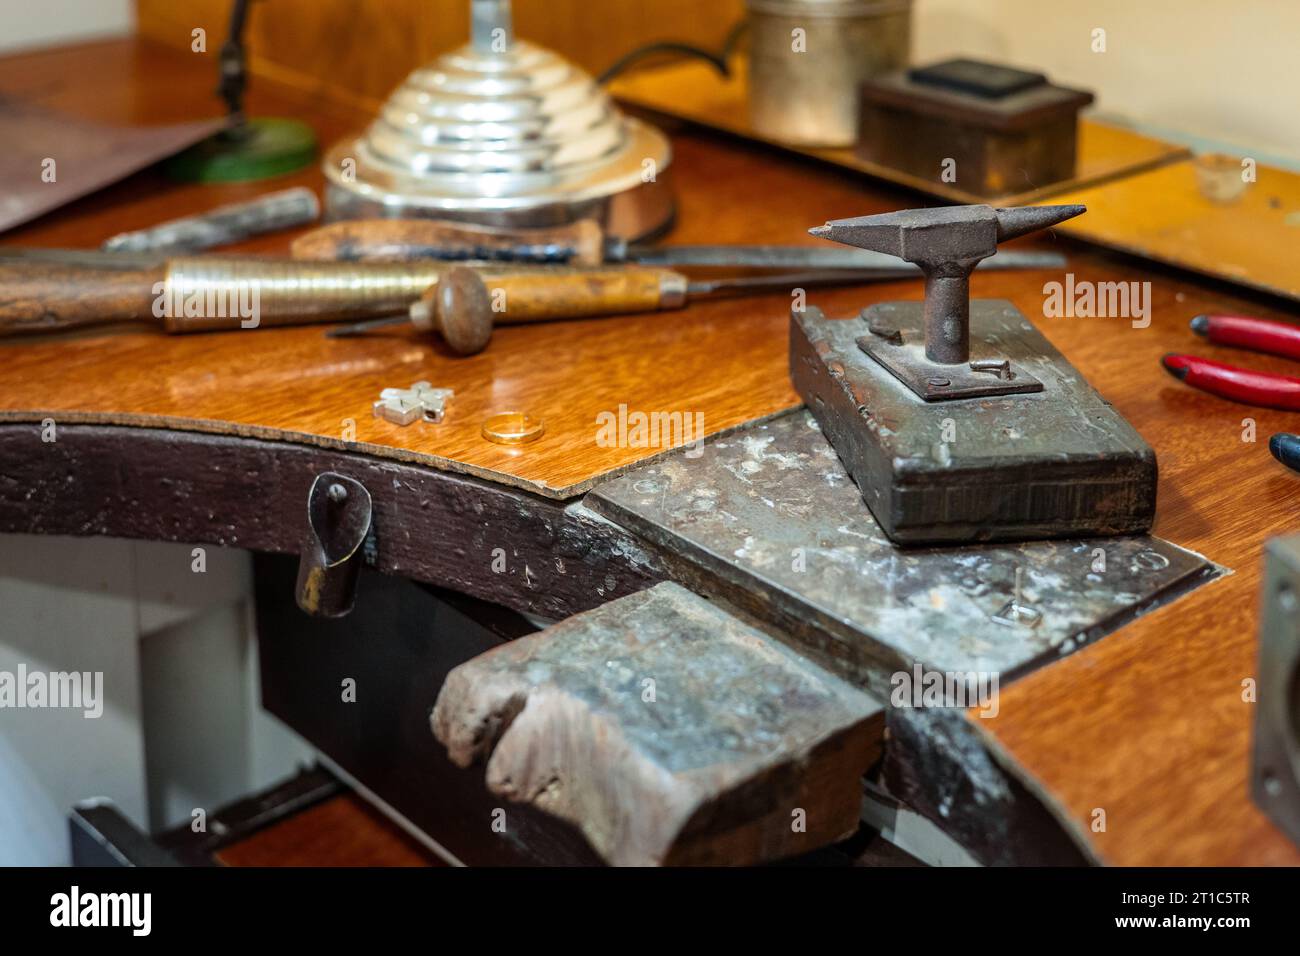 Craft workplace of a jeweler. Jewelry tools and equipment on a goldsmith wooden desk table. Stock Photo